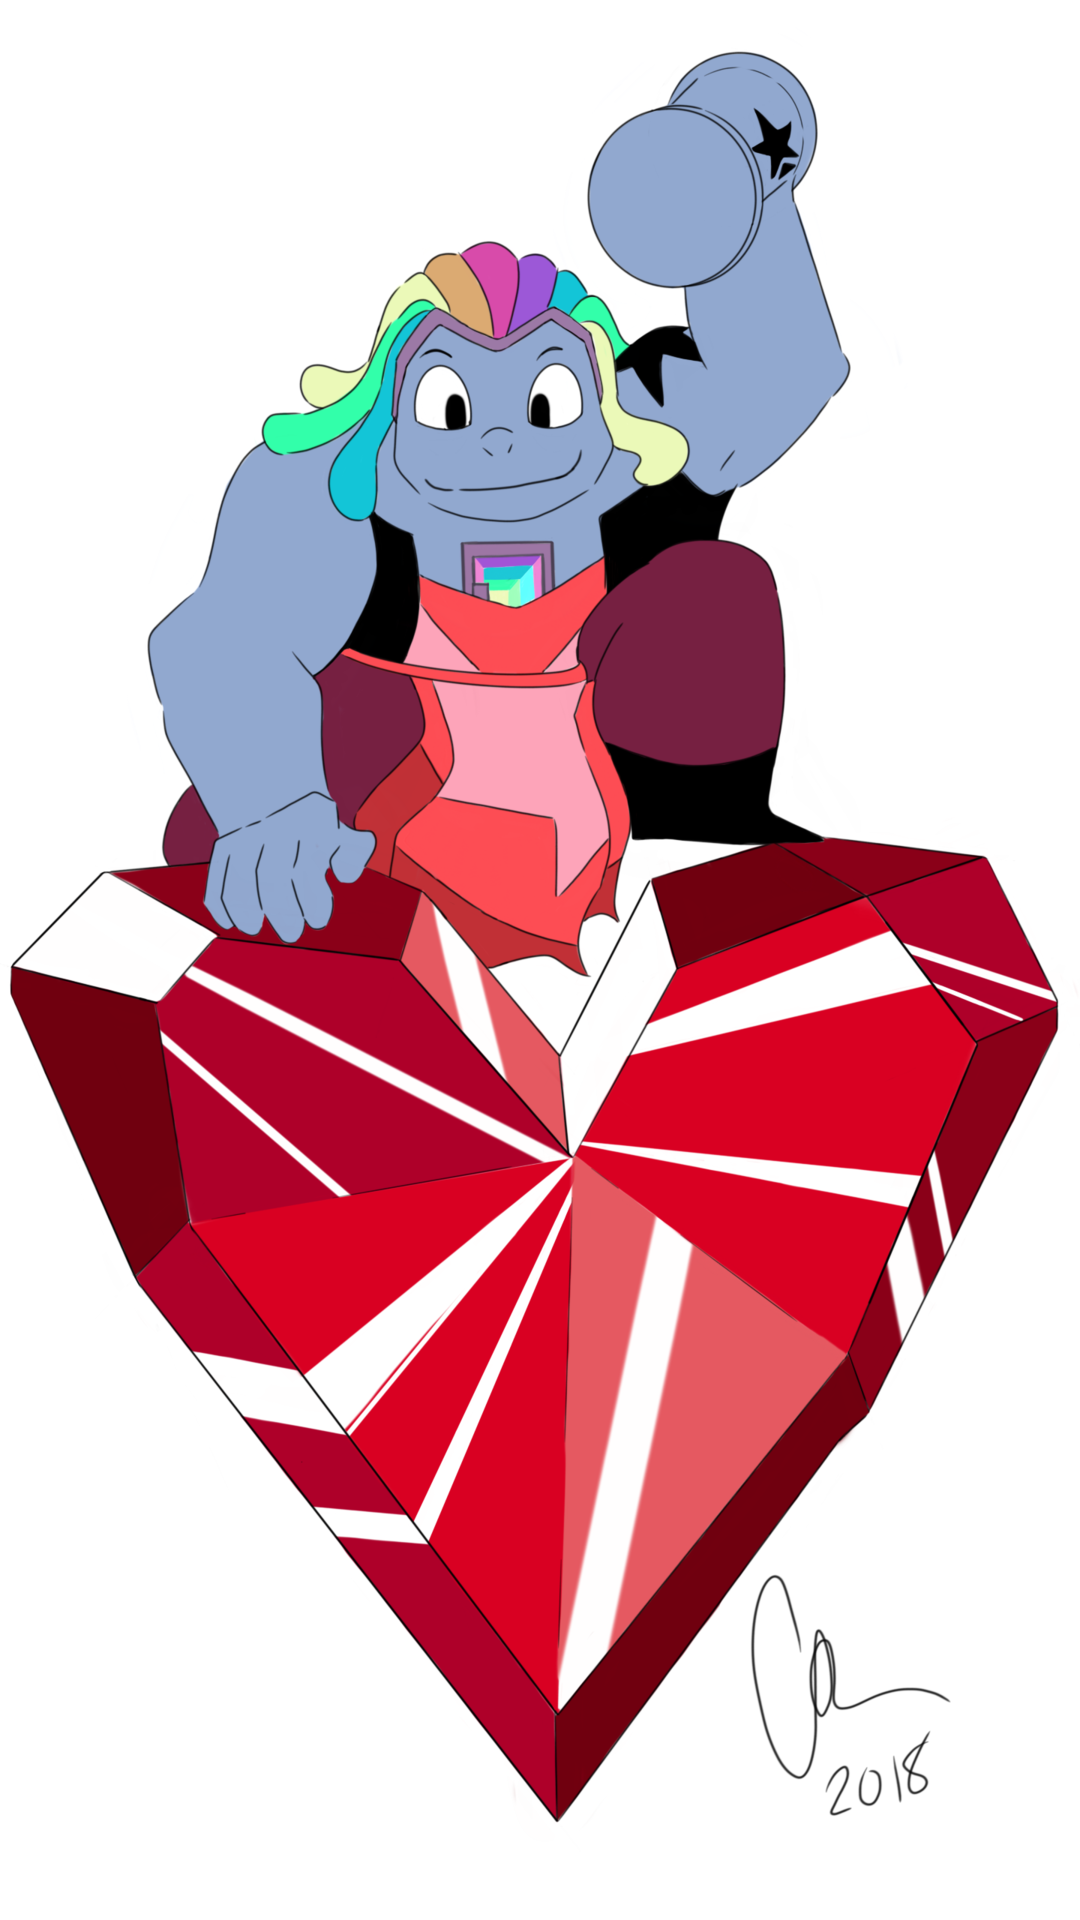 A friend of mine requested a Steven Universe themed Tattoo so I designed this for them. Bismuth is one of my favorites to draw. I’m really proud of this one.